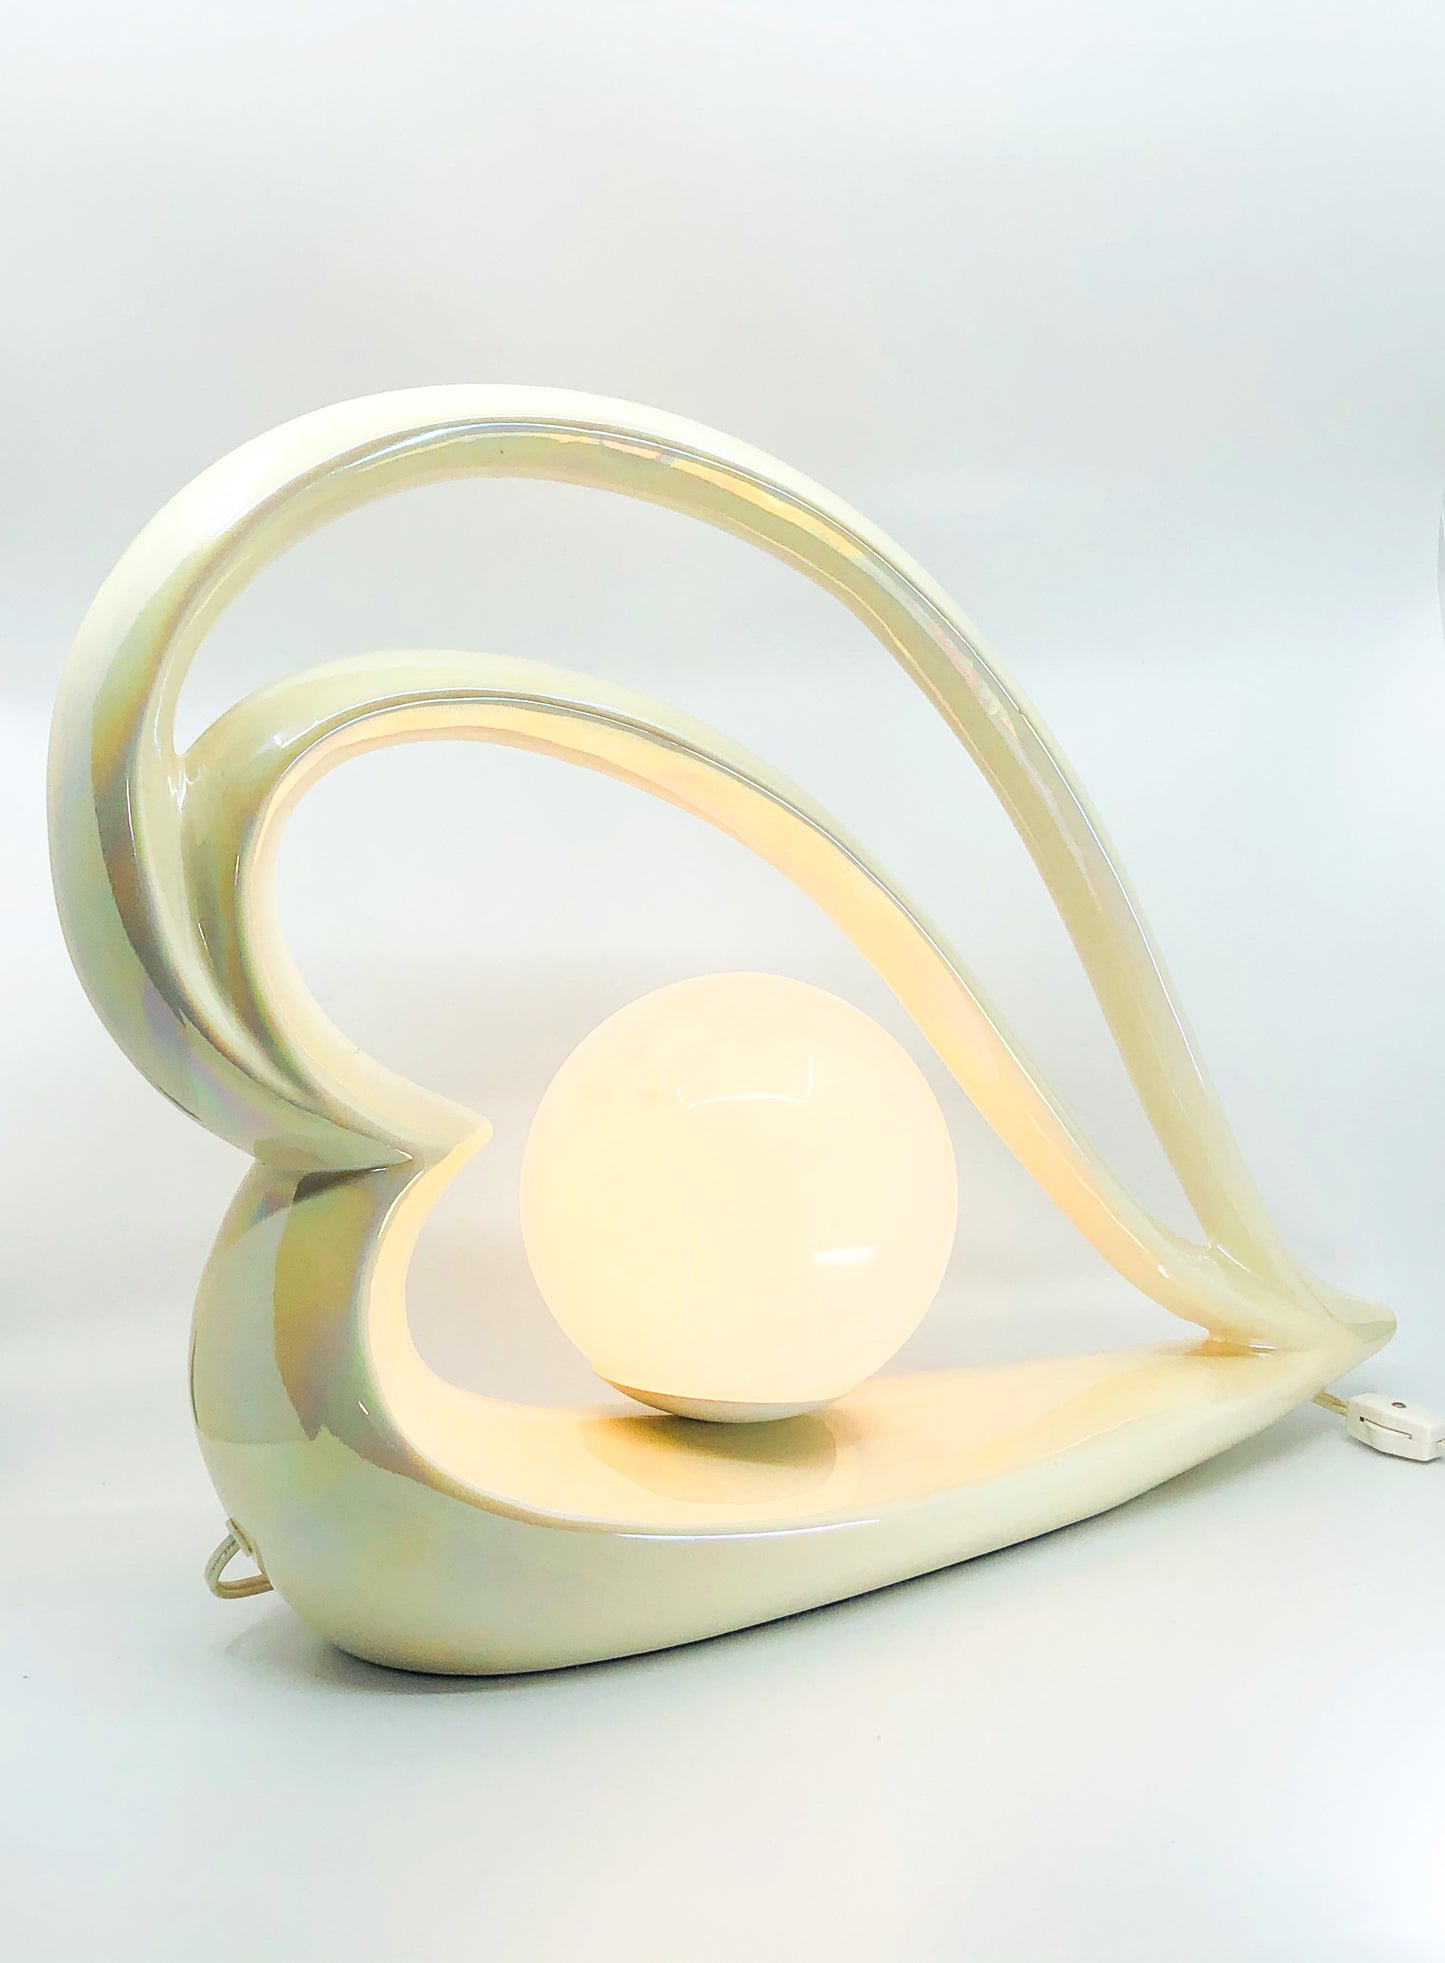 Pair of Deco Revival Opalescent Heart Shape Table Lamp